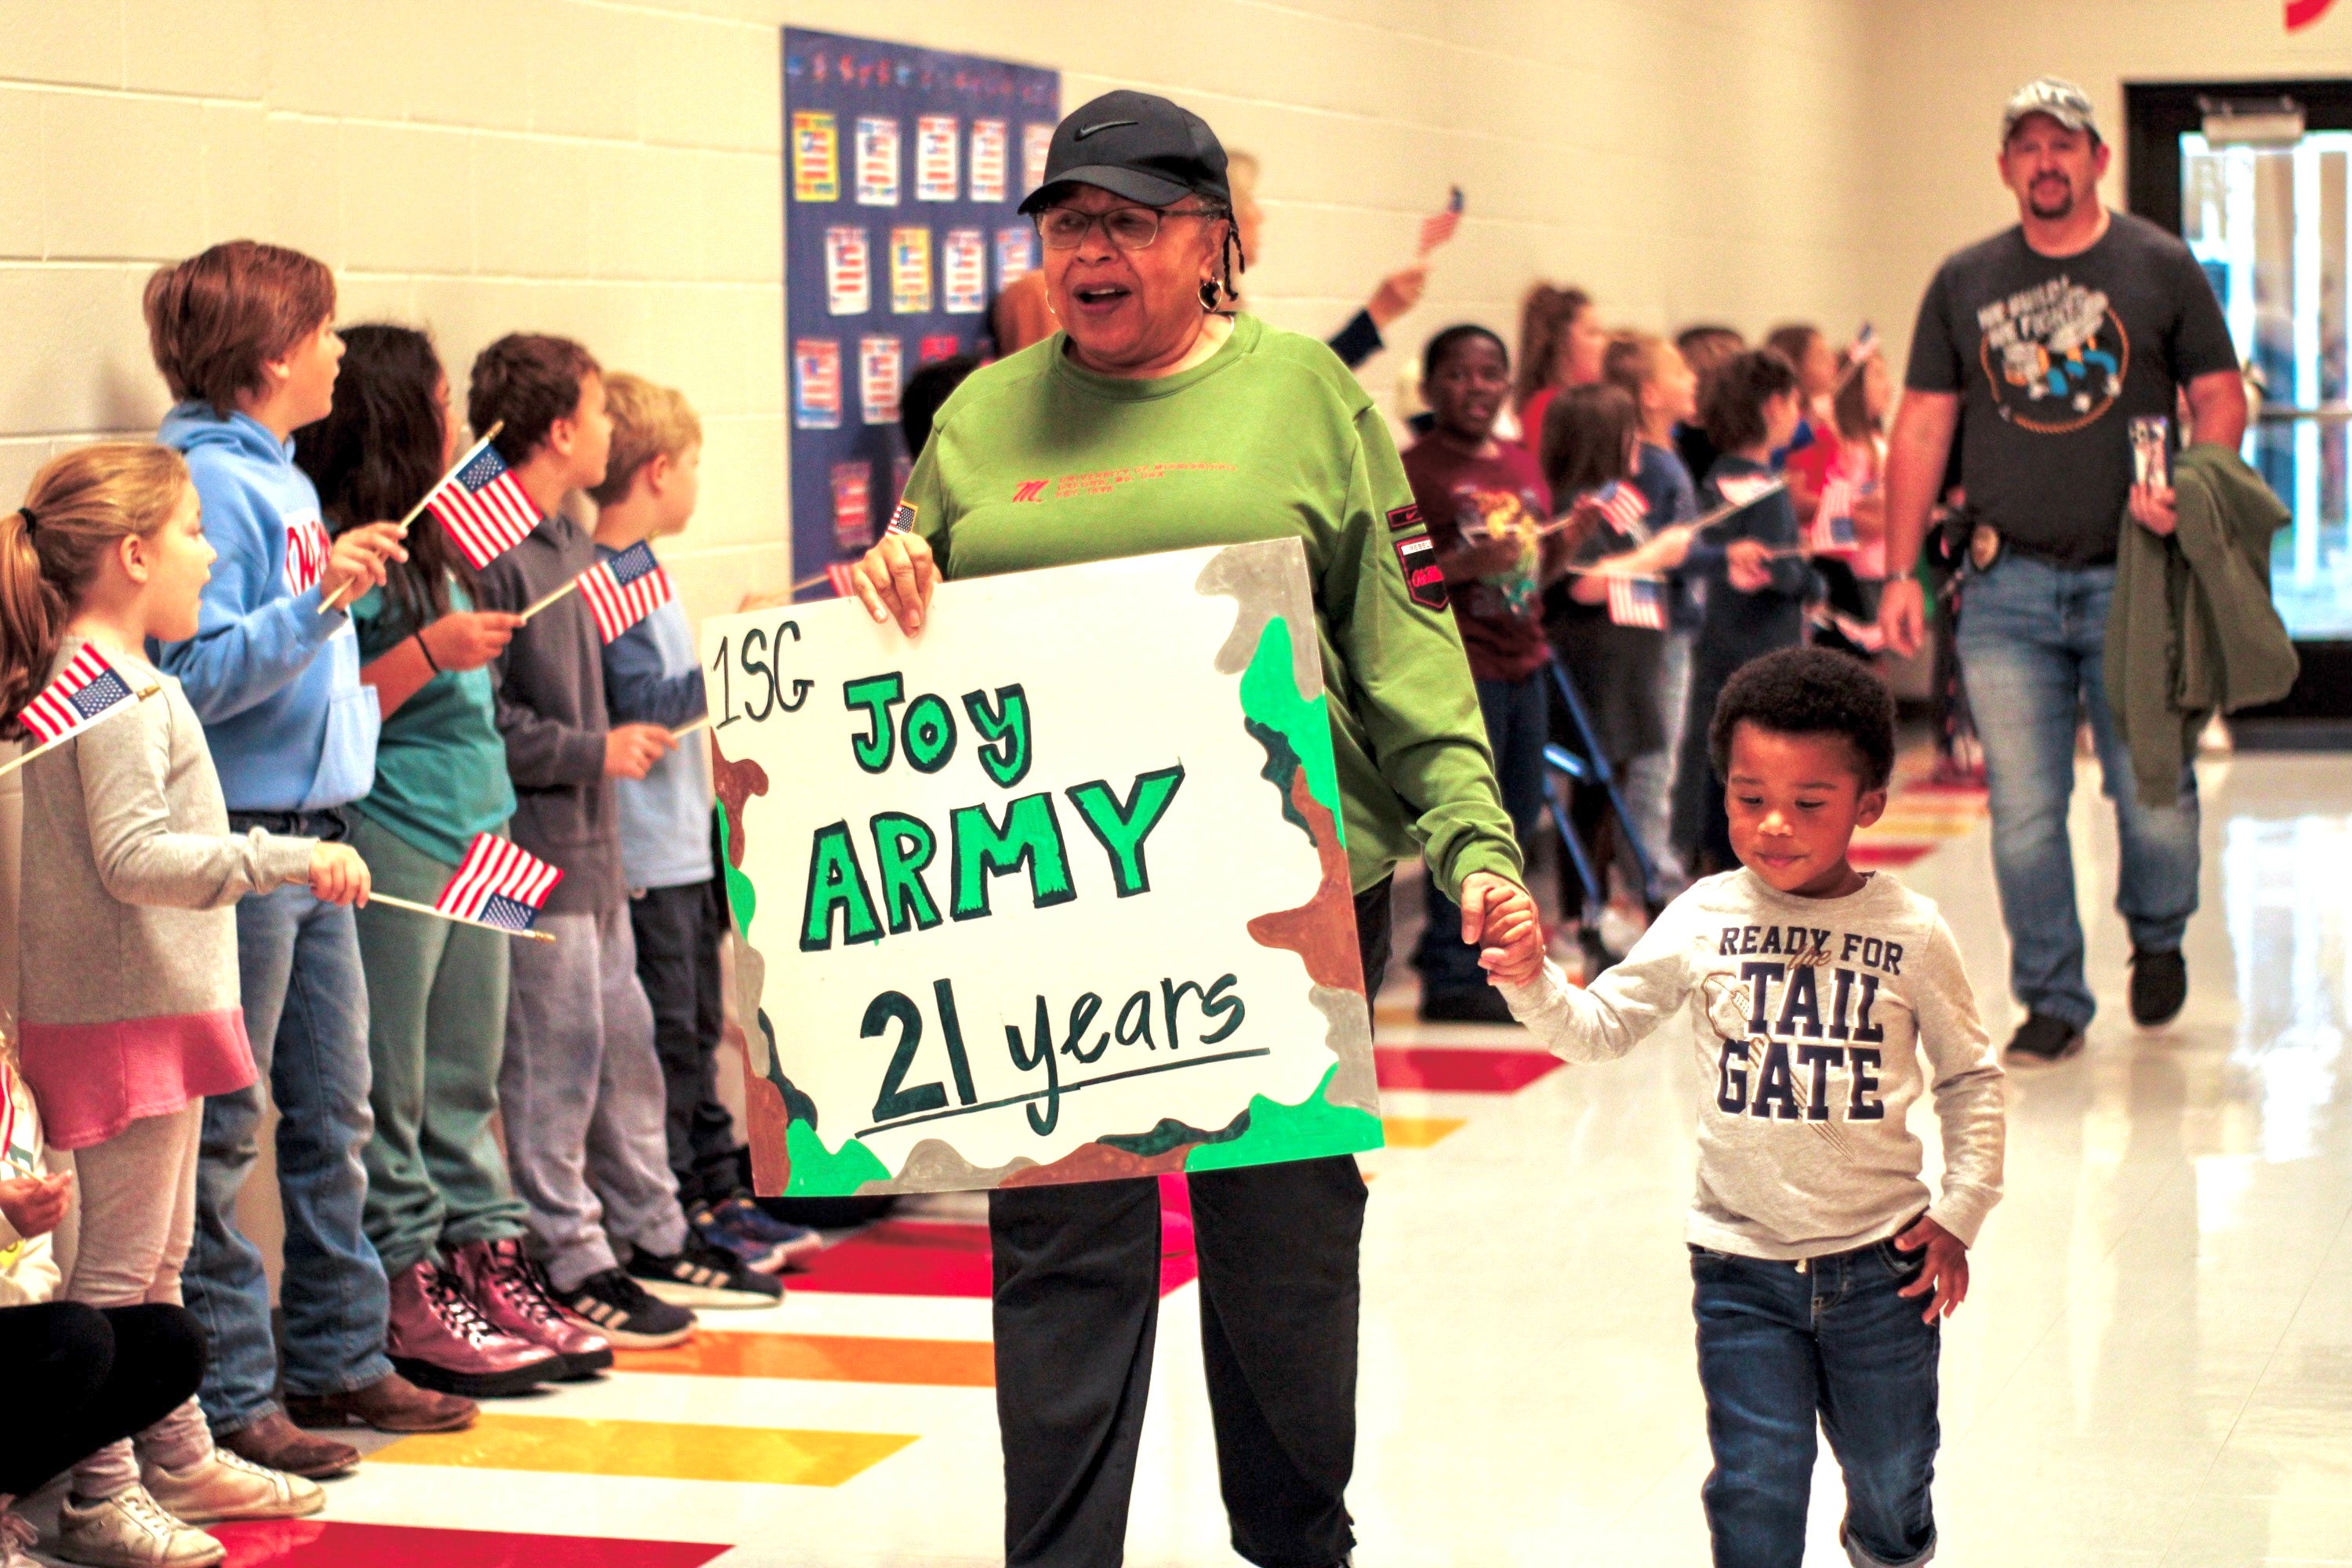 Lafayette Elementary honors military service with an indoor Veterans Day parade, shifting from outdoor plans due to rain, engaging students.